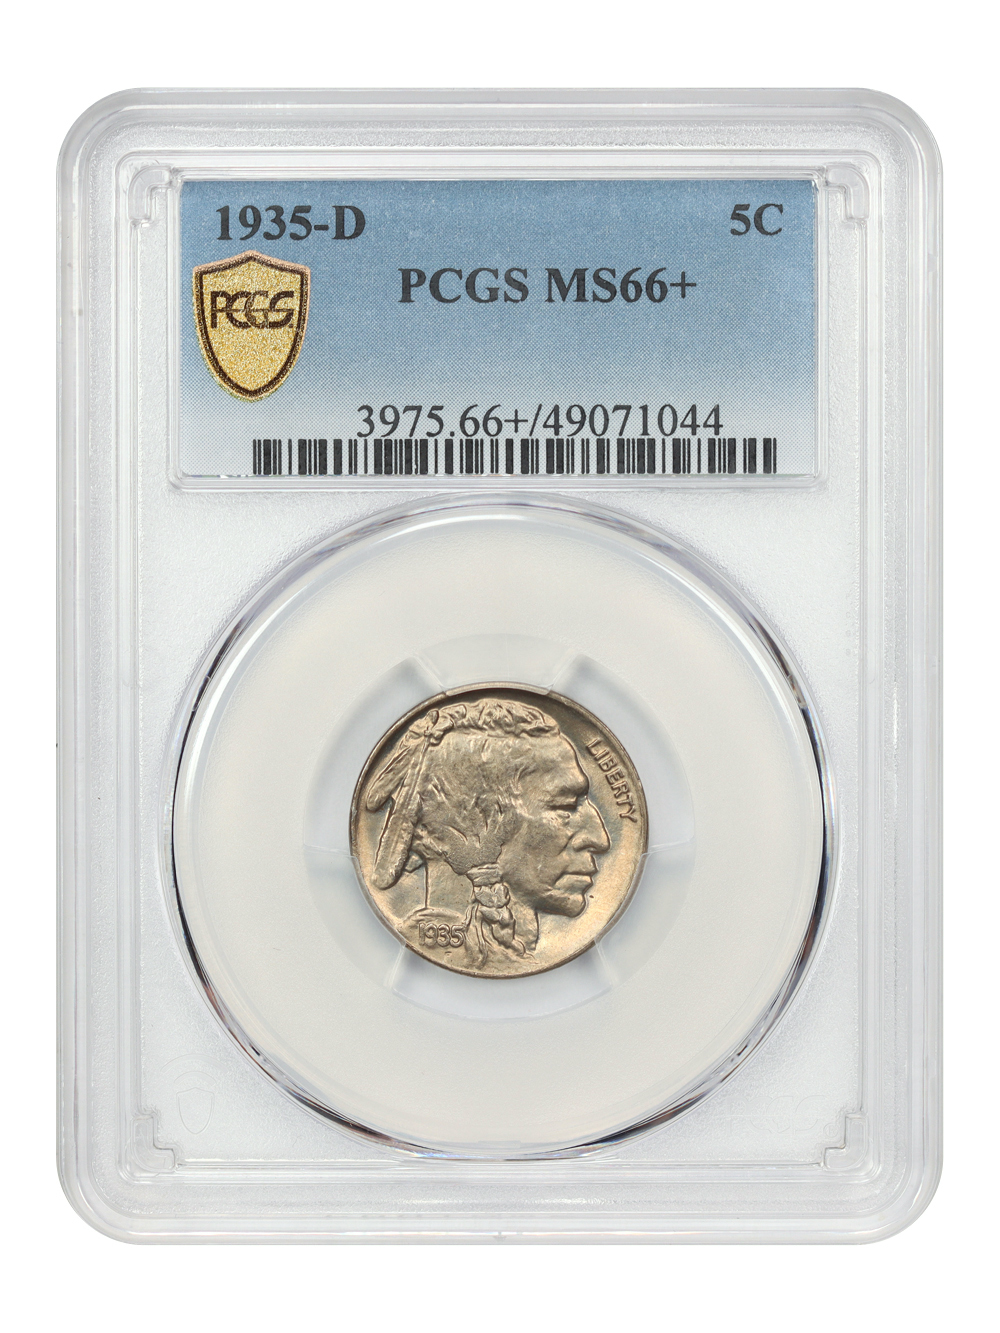 Primary image for 1935-D 5C PCGS MS66+